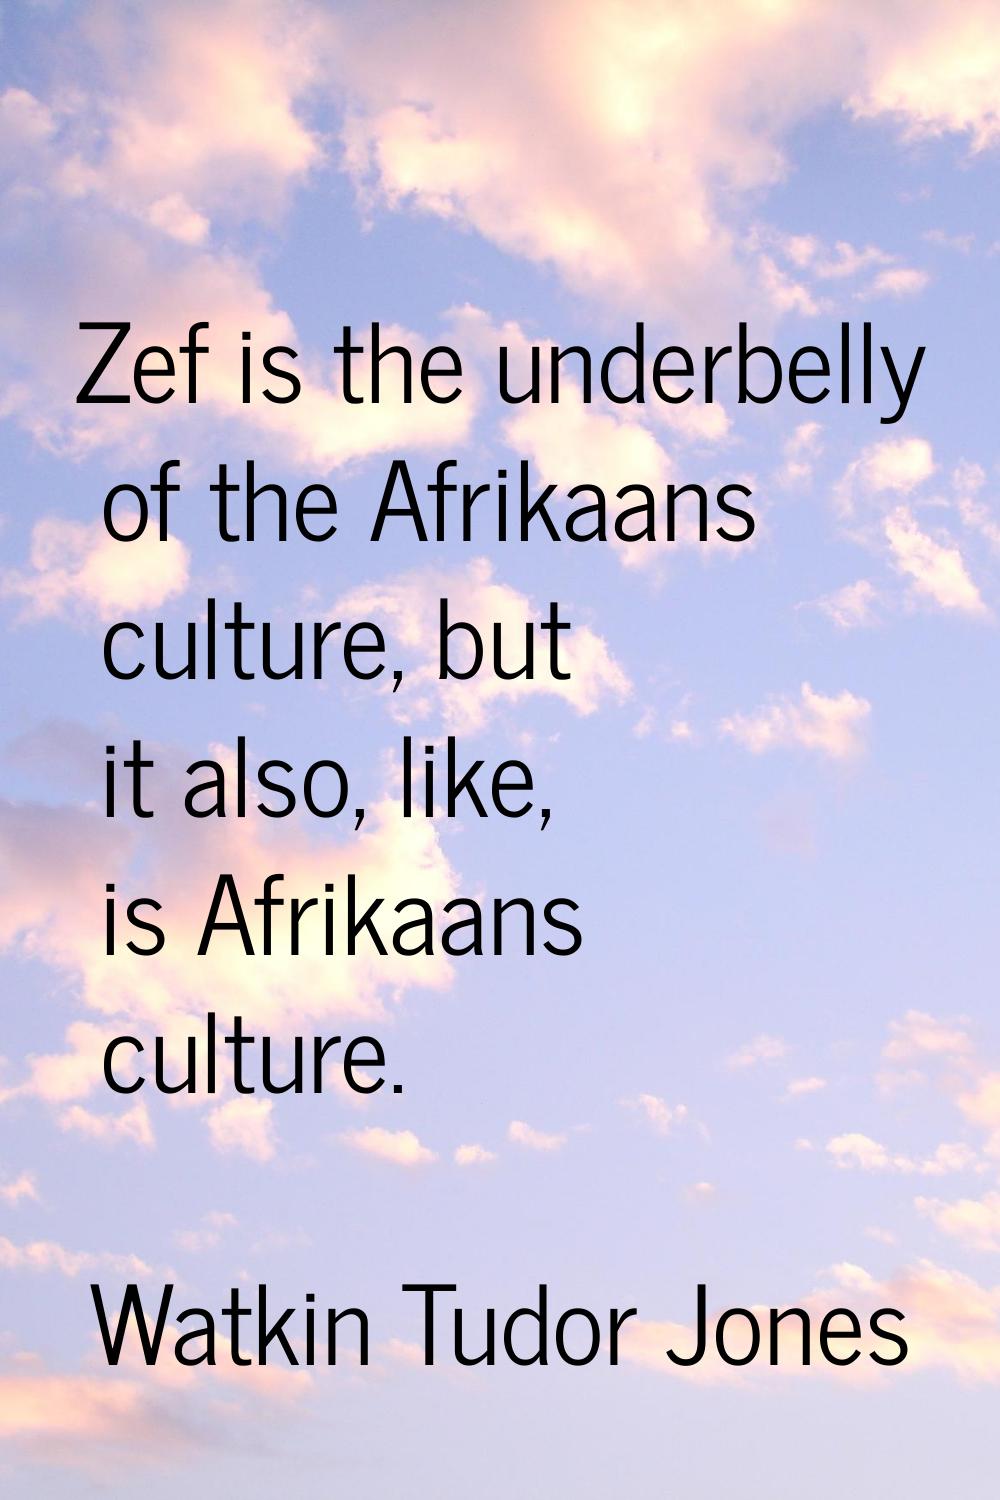 Zef is the underbelly of the Afrikaans culture, but it also, like, is Afrikaans culture.